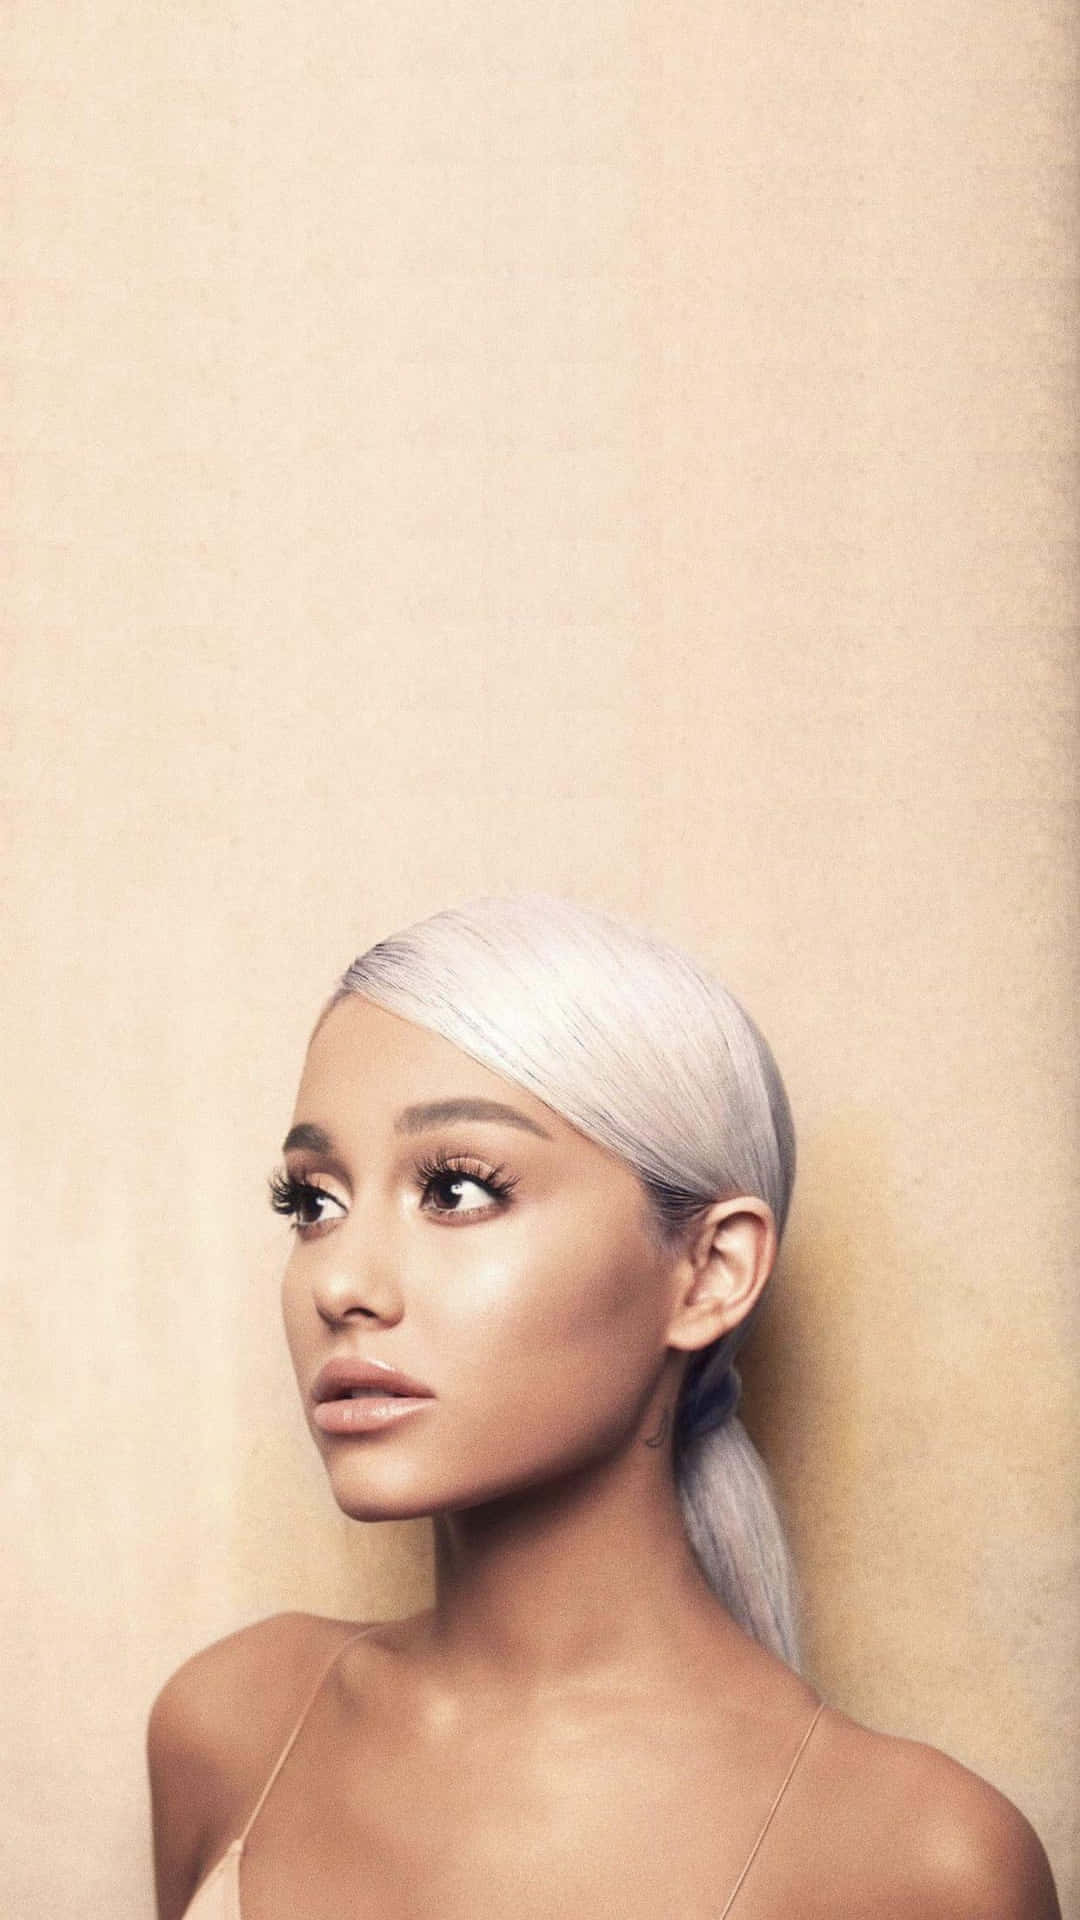 Ariana Grande: Artistic Beauty in a Vintage Aesthetic Wallpaper